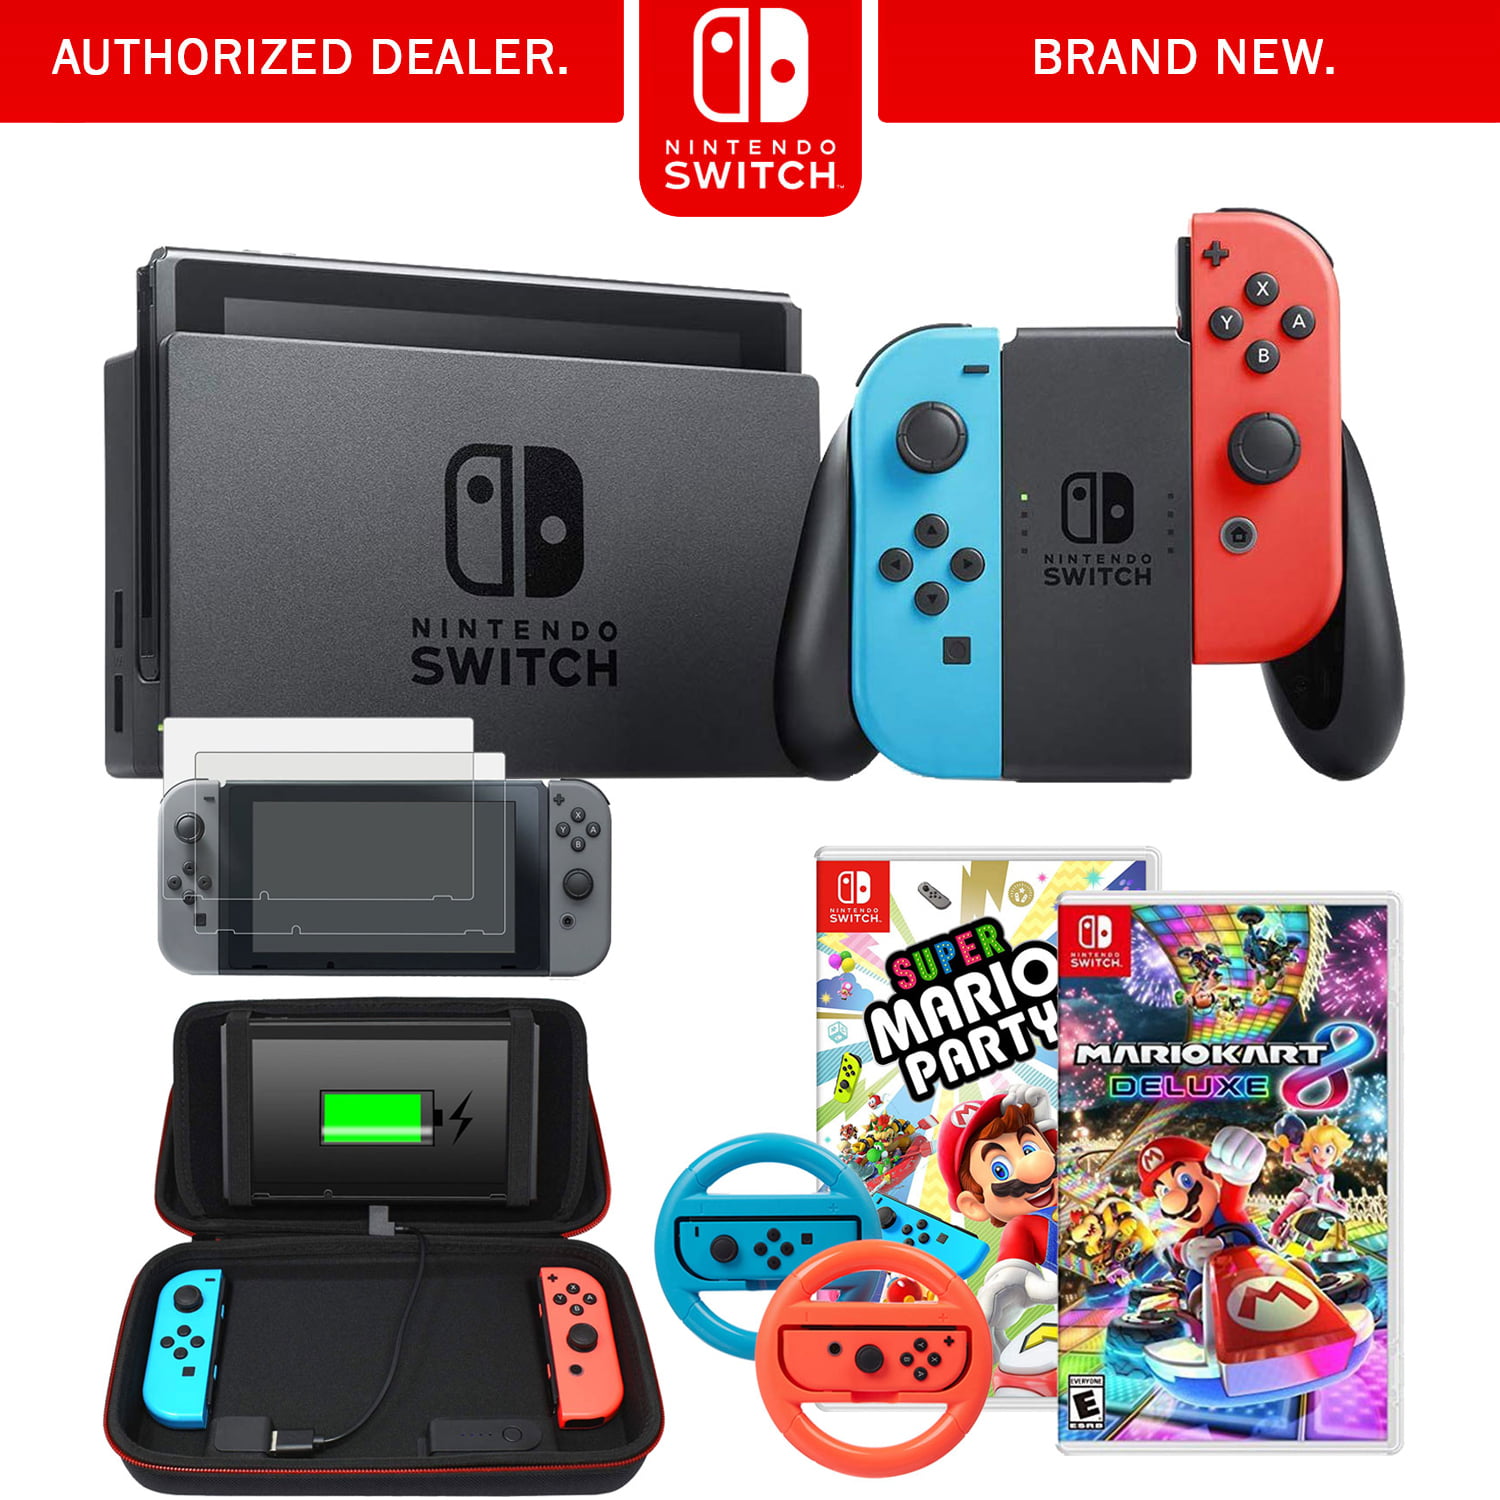 Nintendo Switch 32 GB Console with Neon Blue and Red Joy-Con + Party